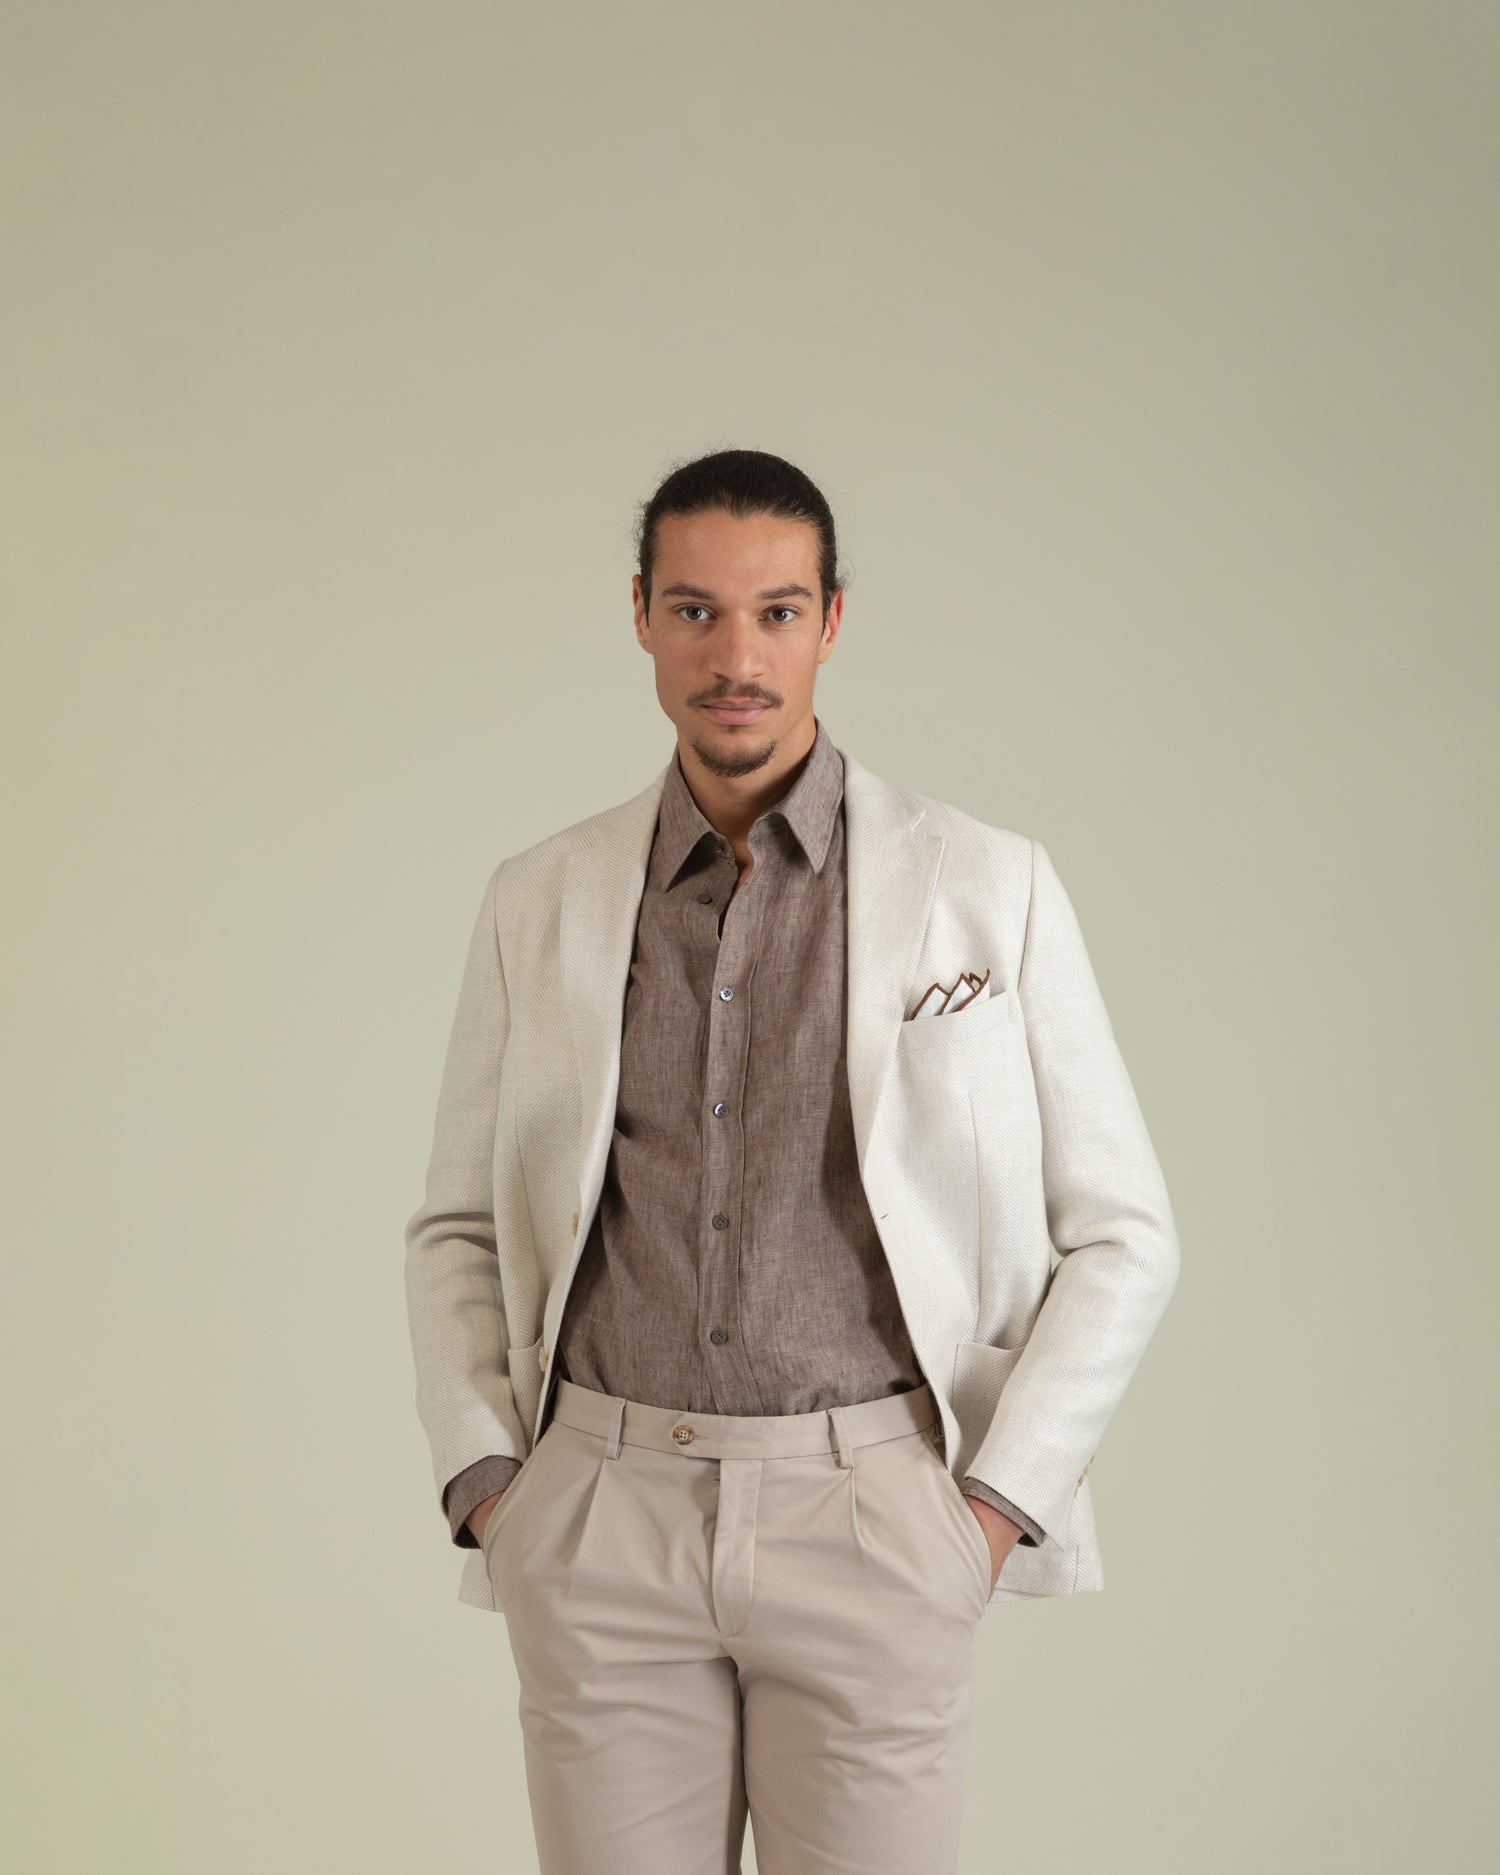 Casual Summer Jacket in Cream White (8624949461322)